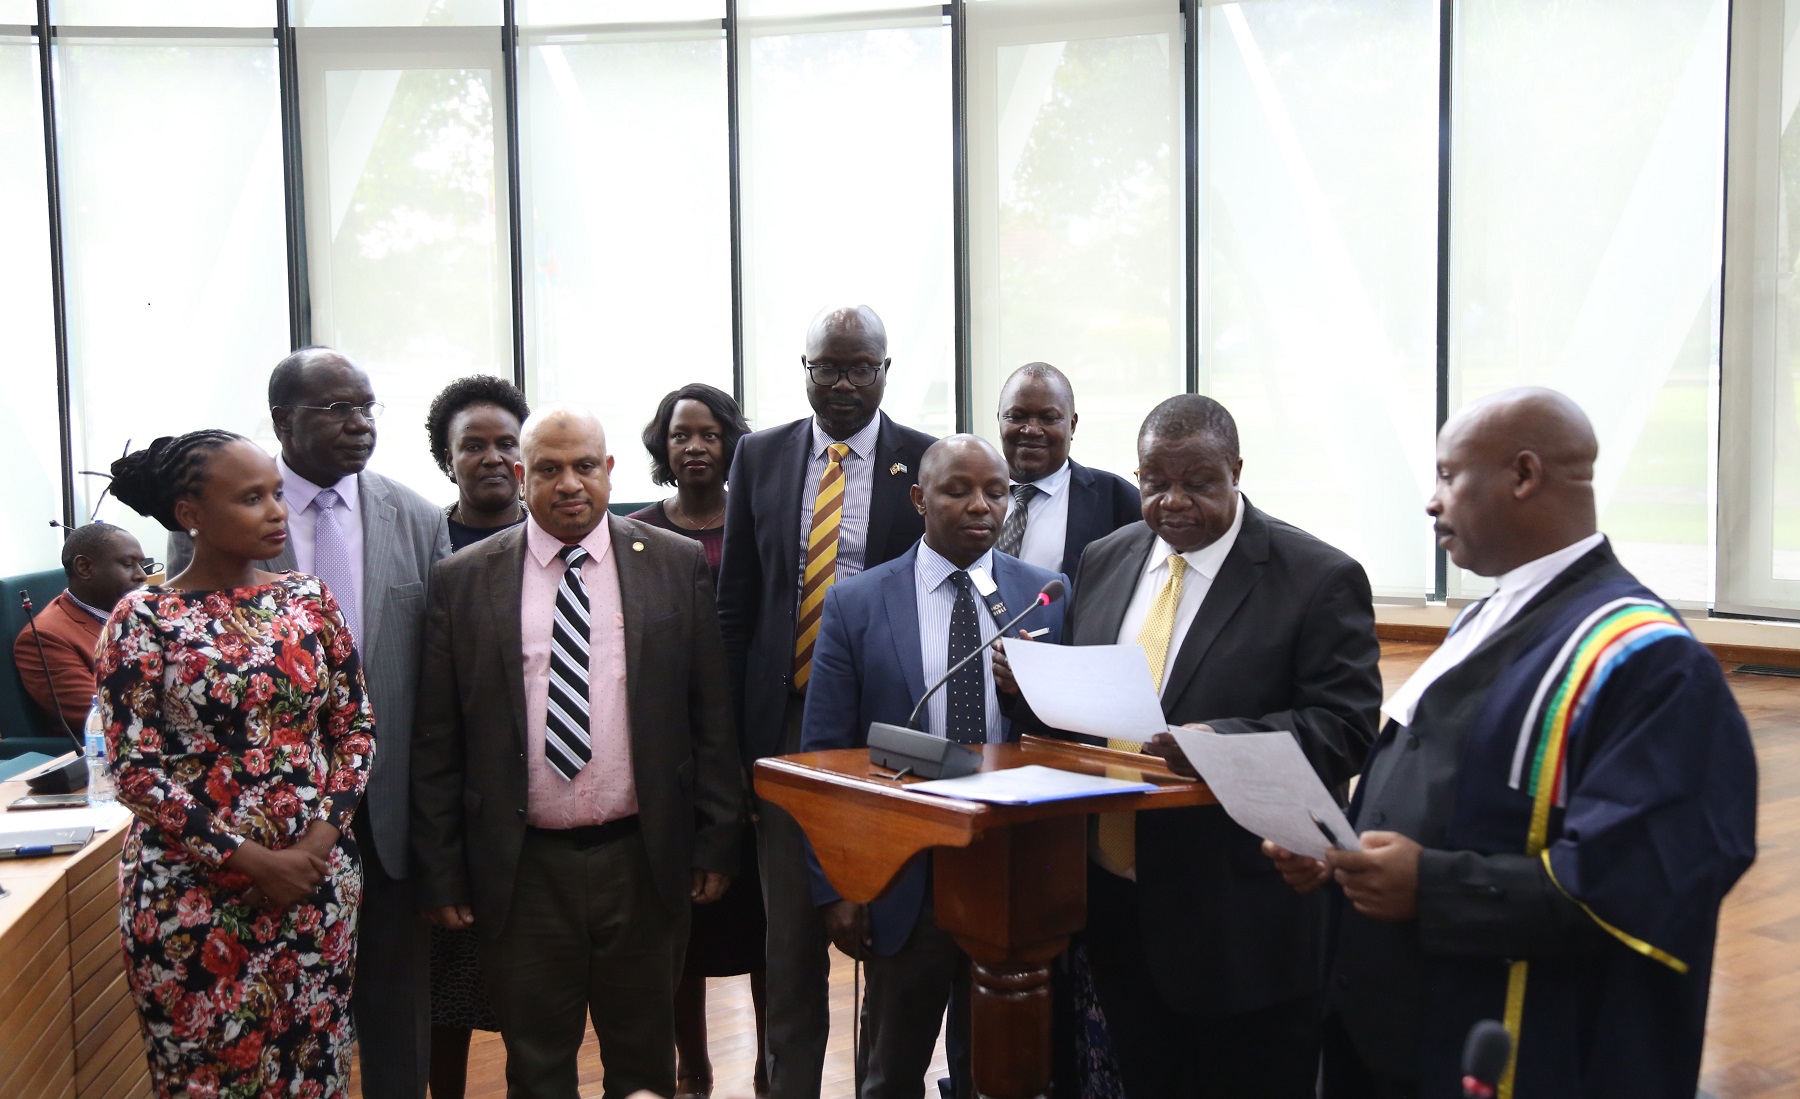  Hon. Major General (Rtd) Kahinda Otafiire taking Oath of Allegiance as an Ex-Officio Member of the Assembly flanked by several Members.